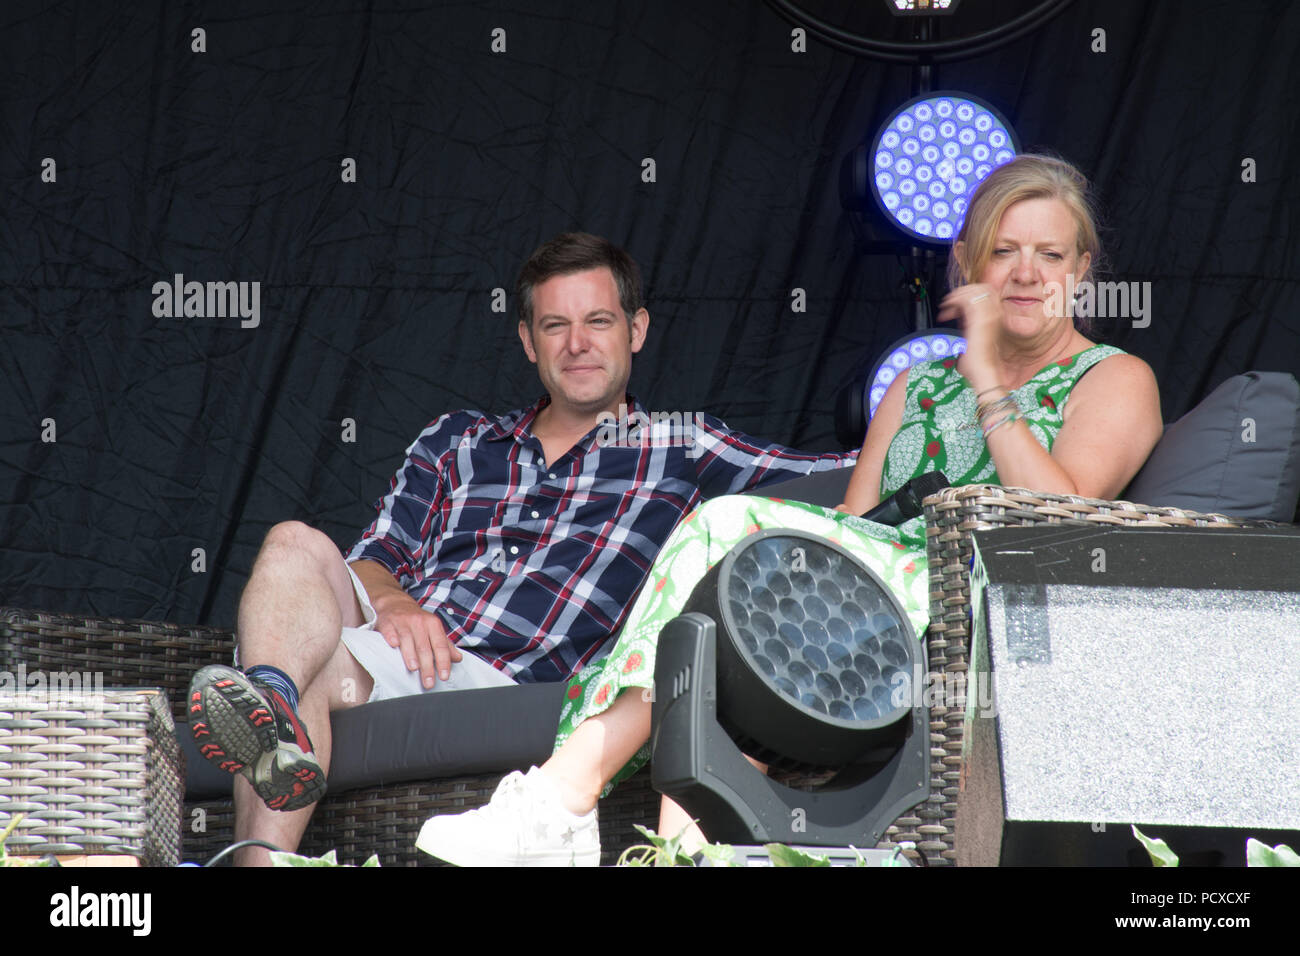 Blenheim Palace, people went to the Countryfile Live show on a hot, sunny day. There were opportunities to see and meet Countryfile presenters, including Matt Baker and Charlotte Smith. Stock Photo